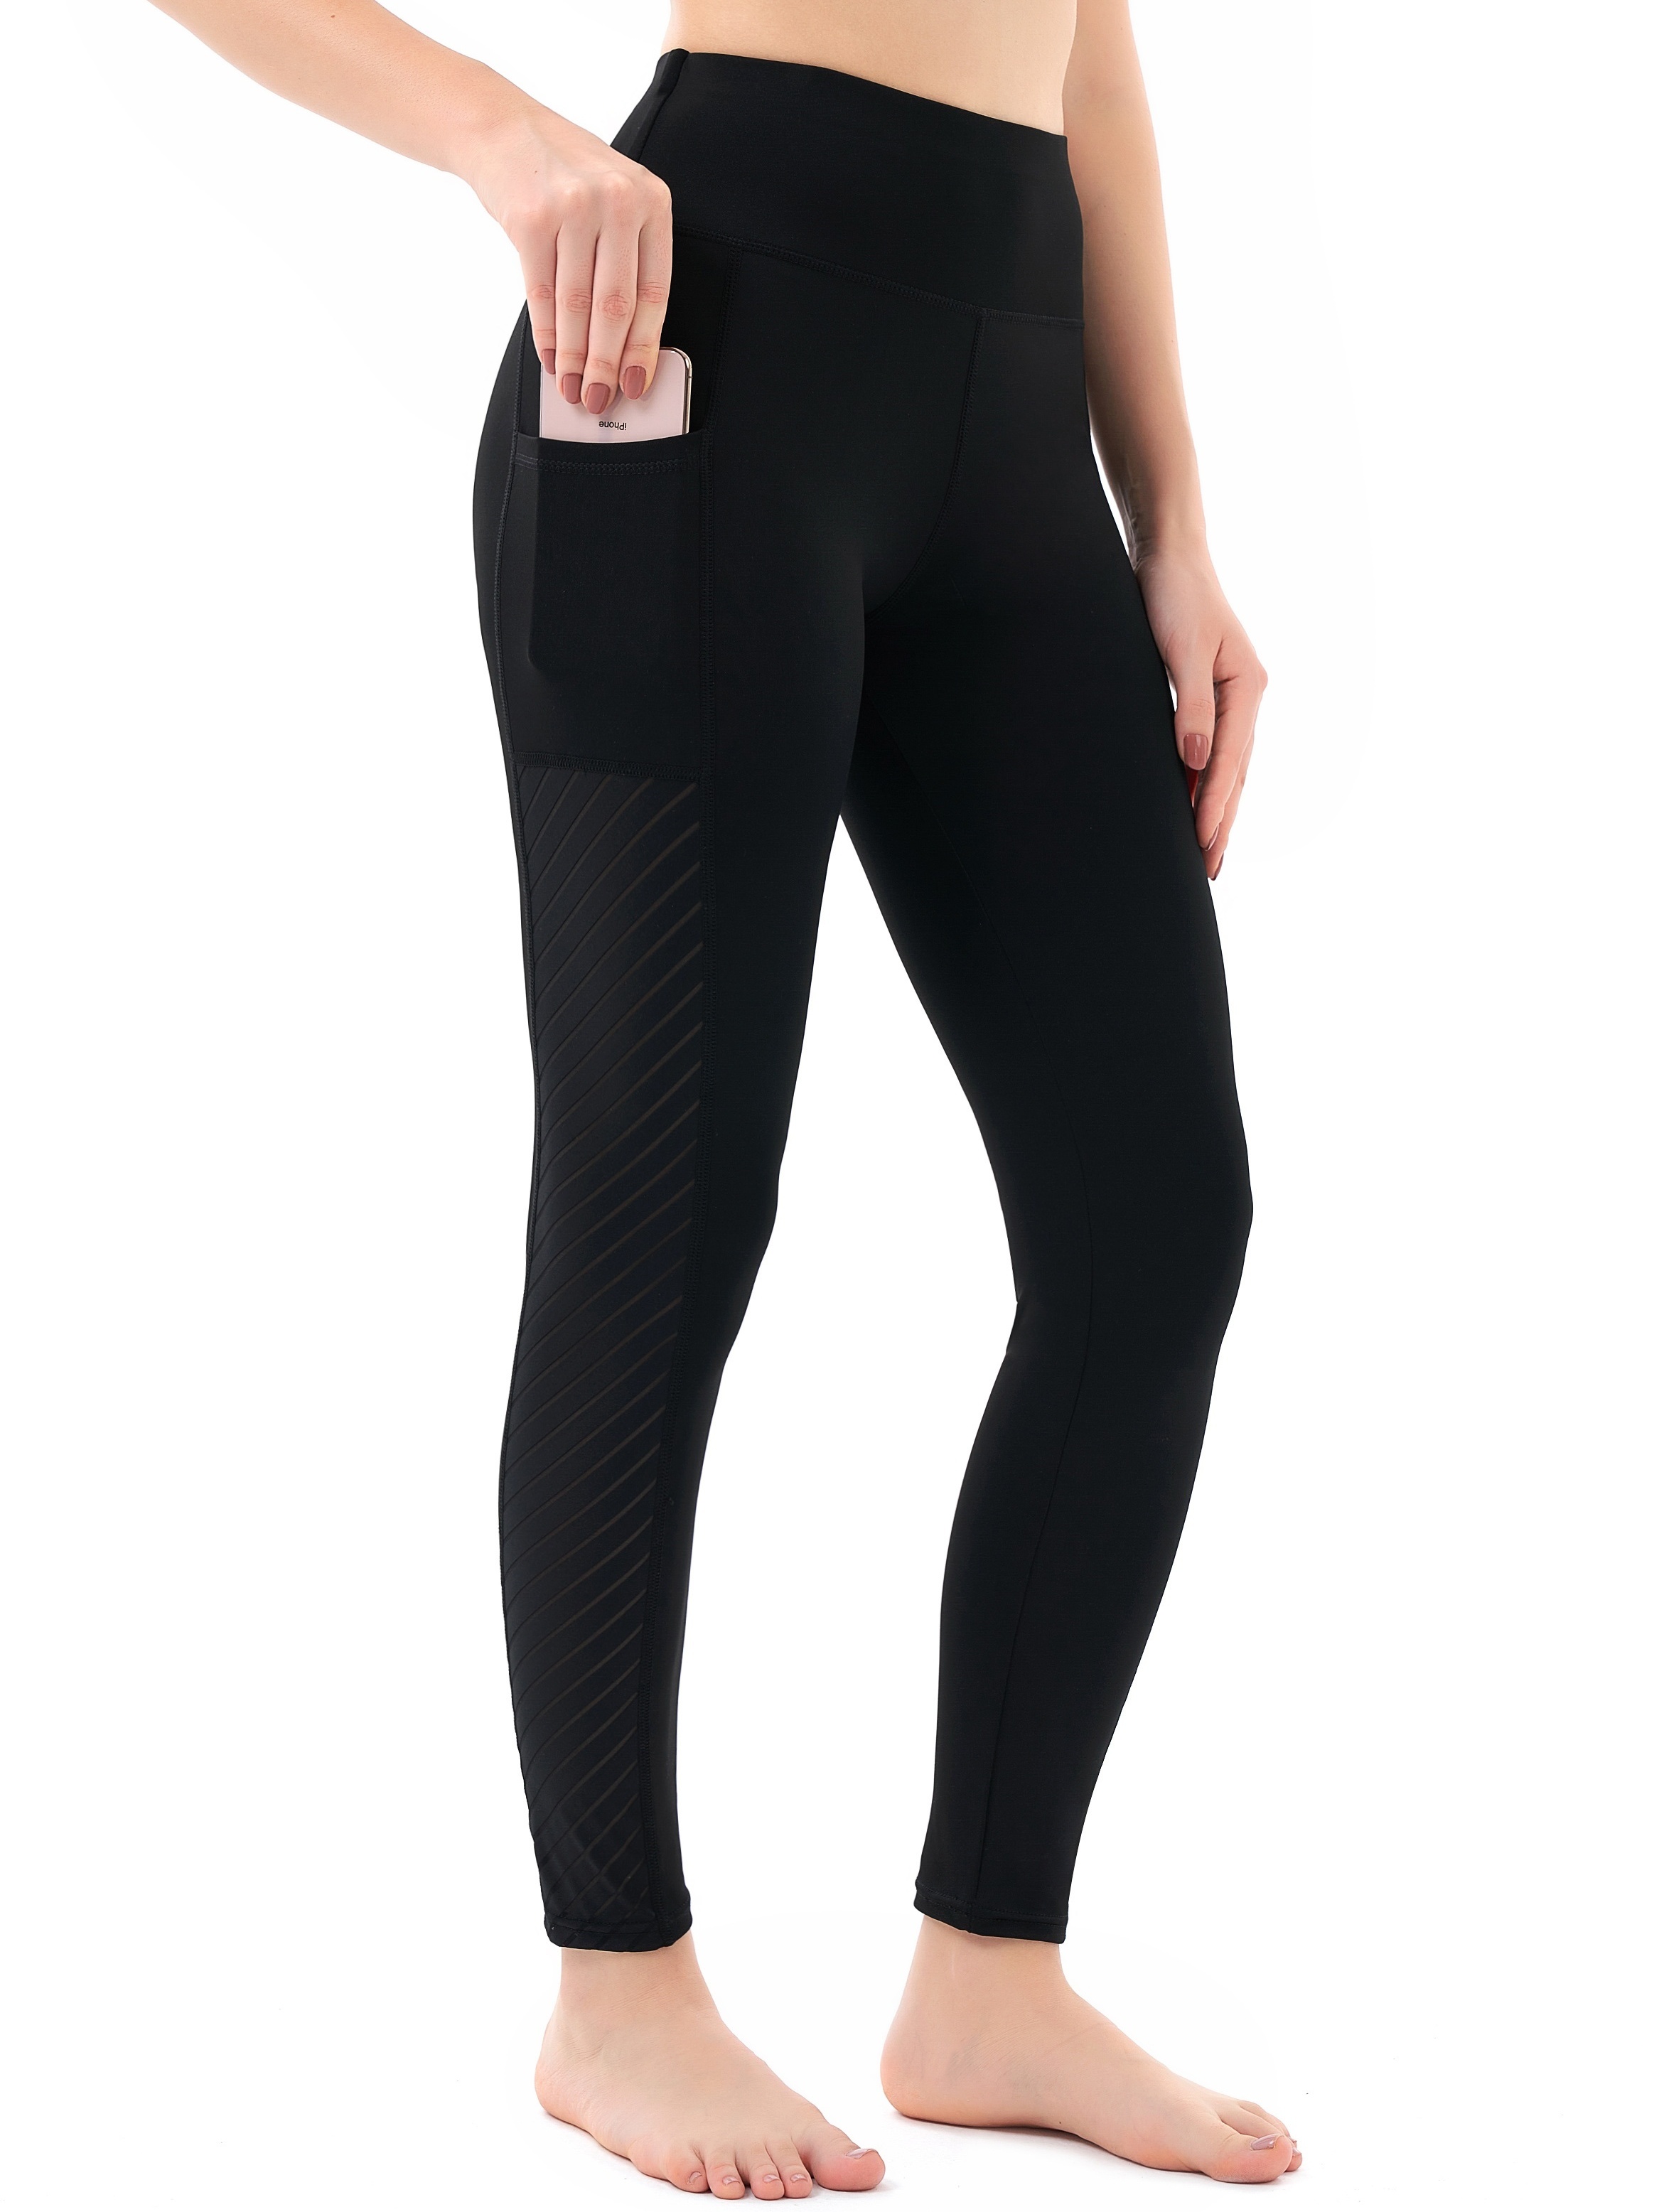 Women's Yoga Pants With Pockets, Leggings With Pockets, High Waist Tummy  Control Workout Pants